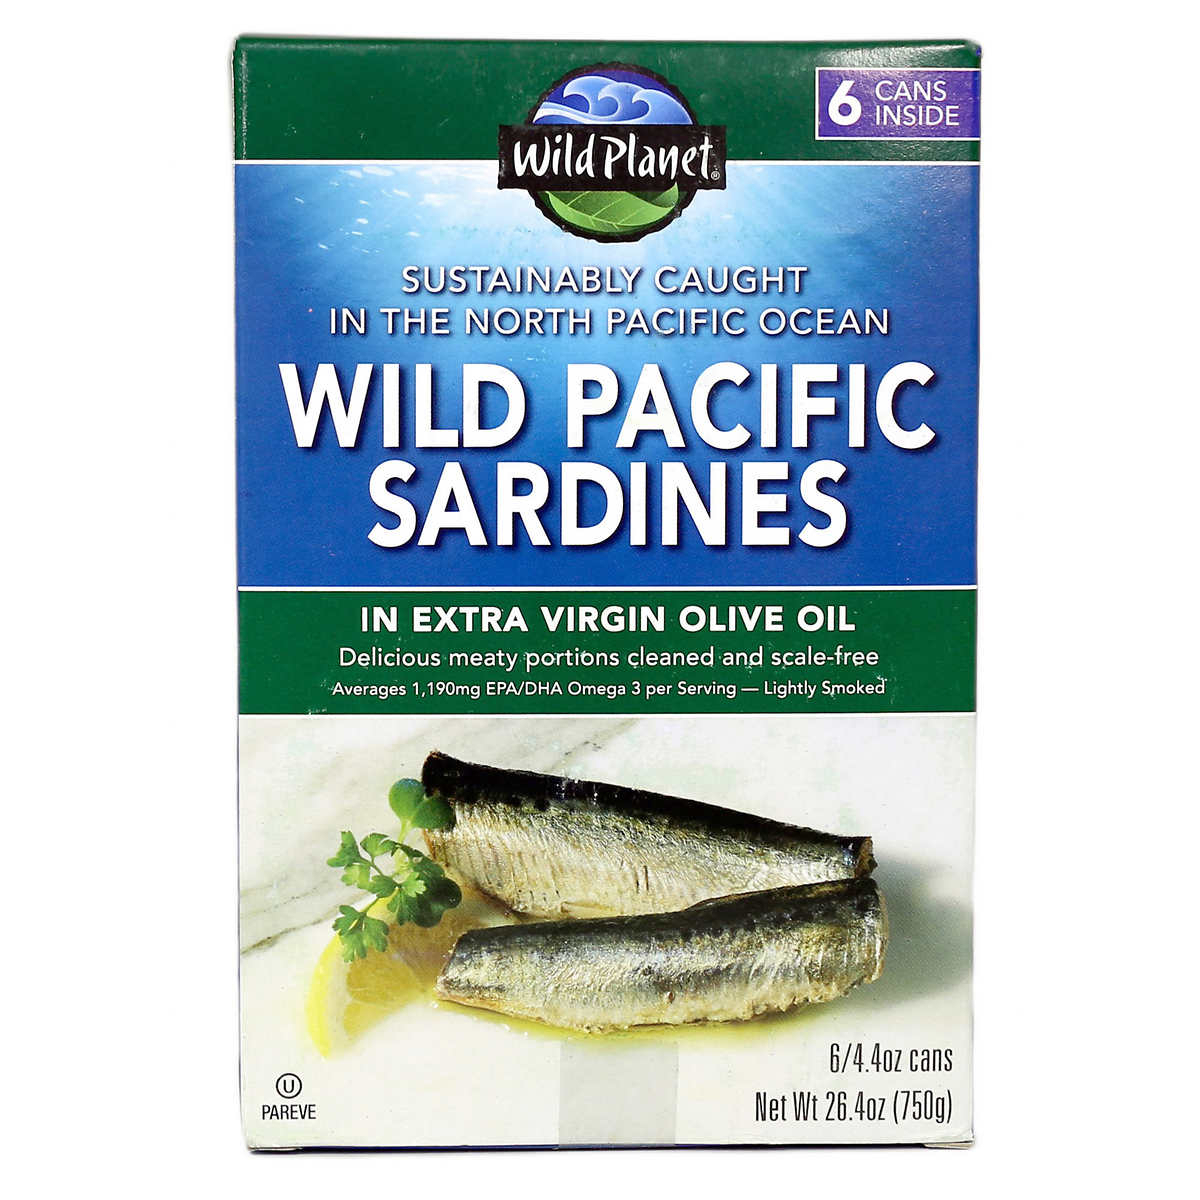 Wild Planet Wild Pacific Sardines In Extra Virgin Olive Oil, 4.4 Ounce (6 Count)